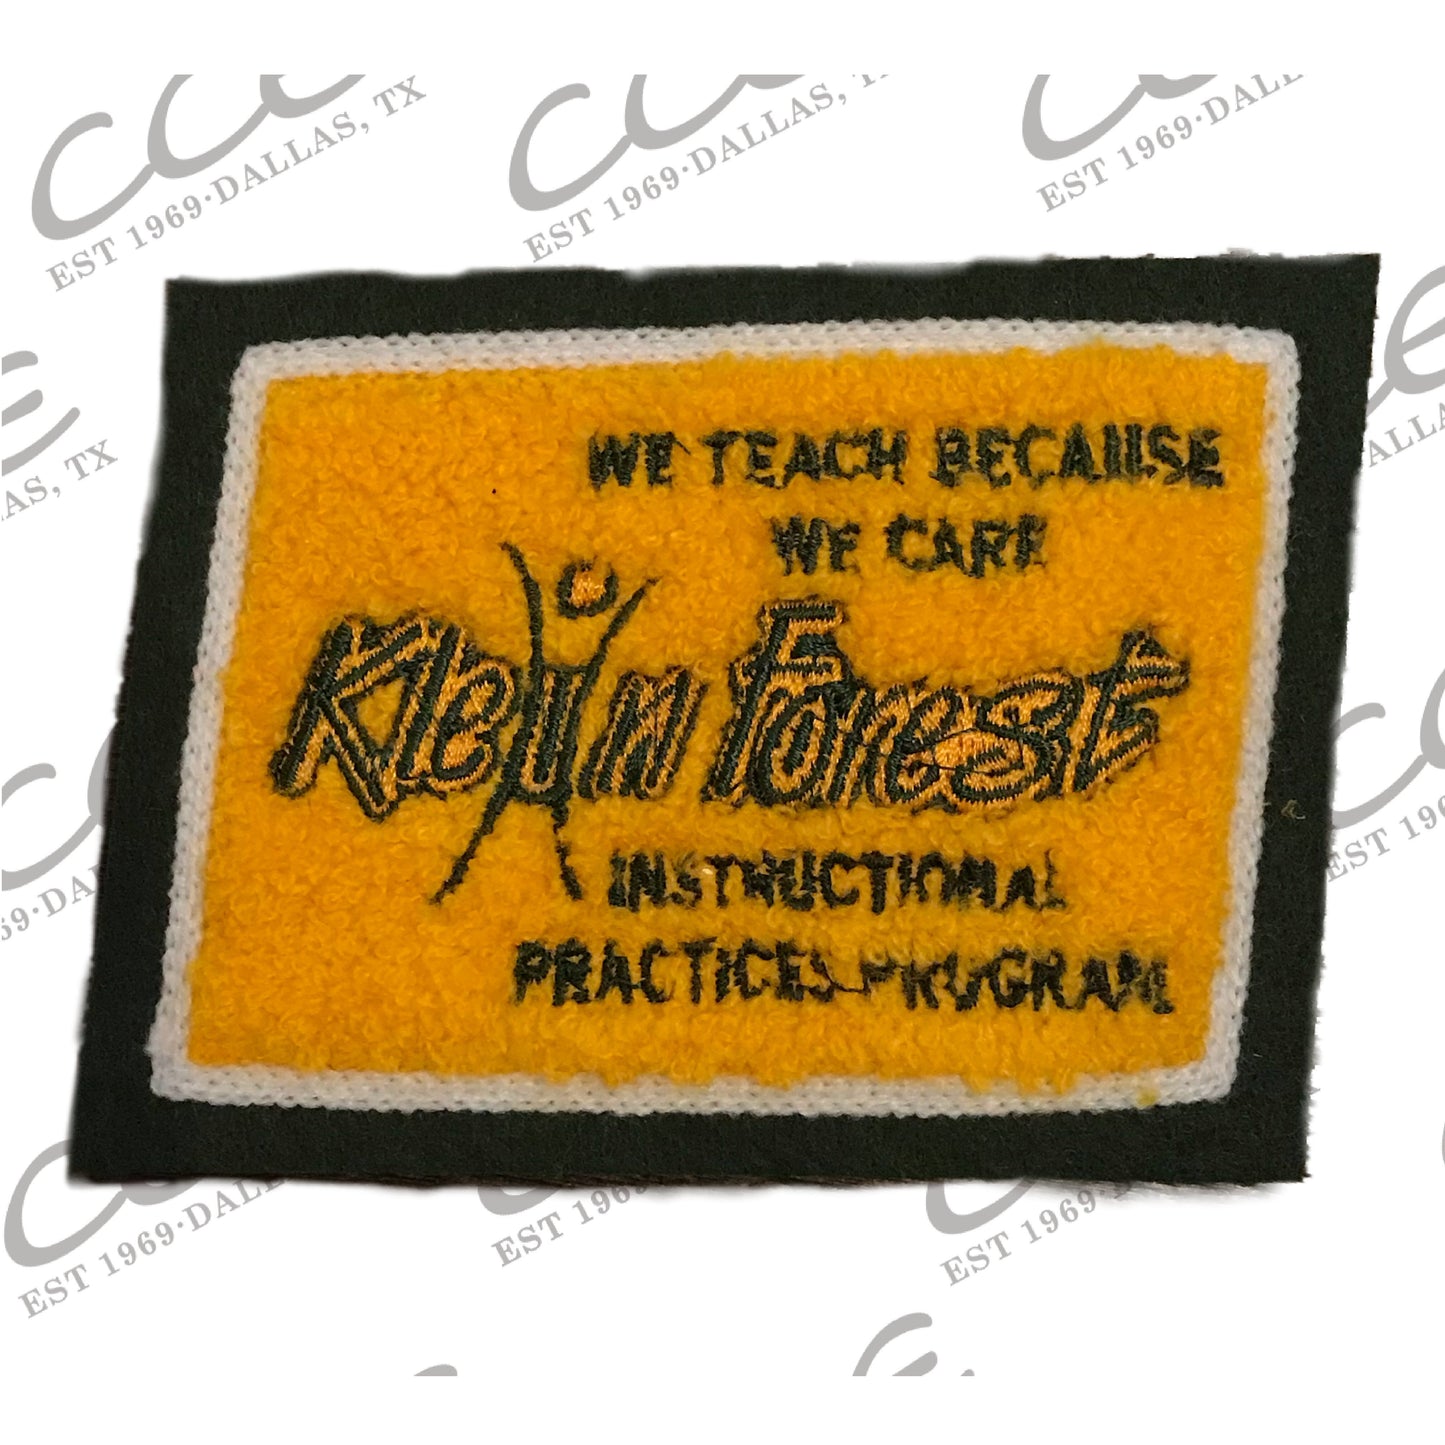 Klein Forest IPET Sleeve Patch